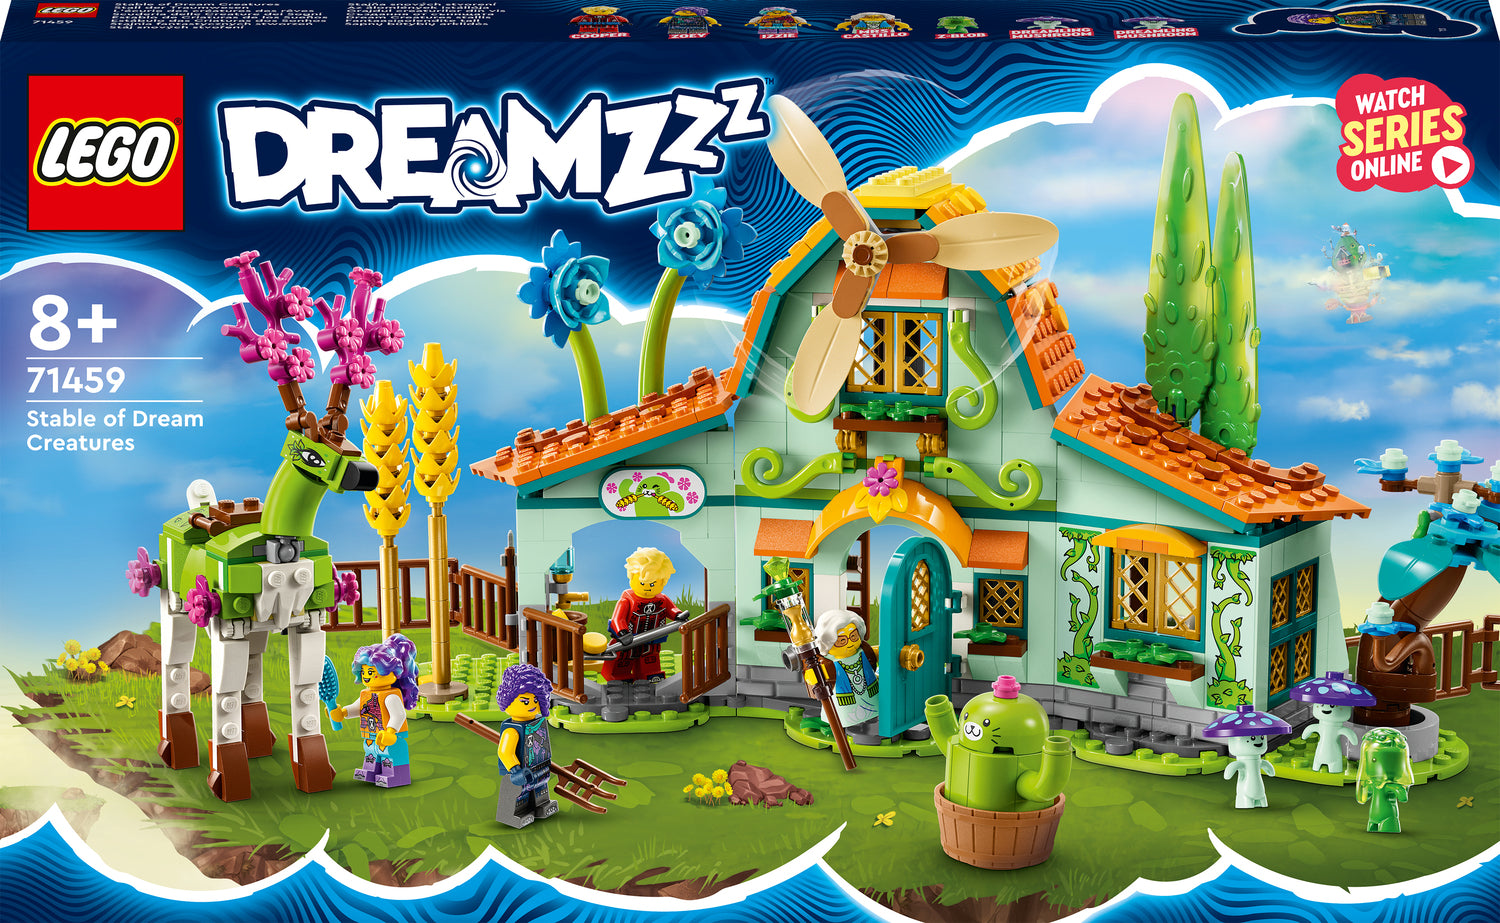 LEGO DREAMZzz 71459 Stable of Dream Creatures review